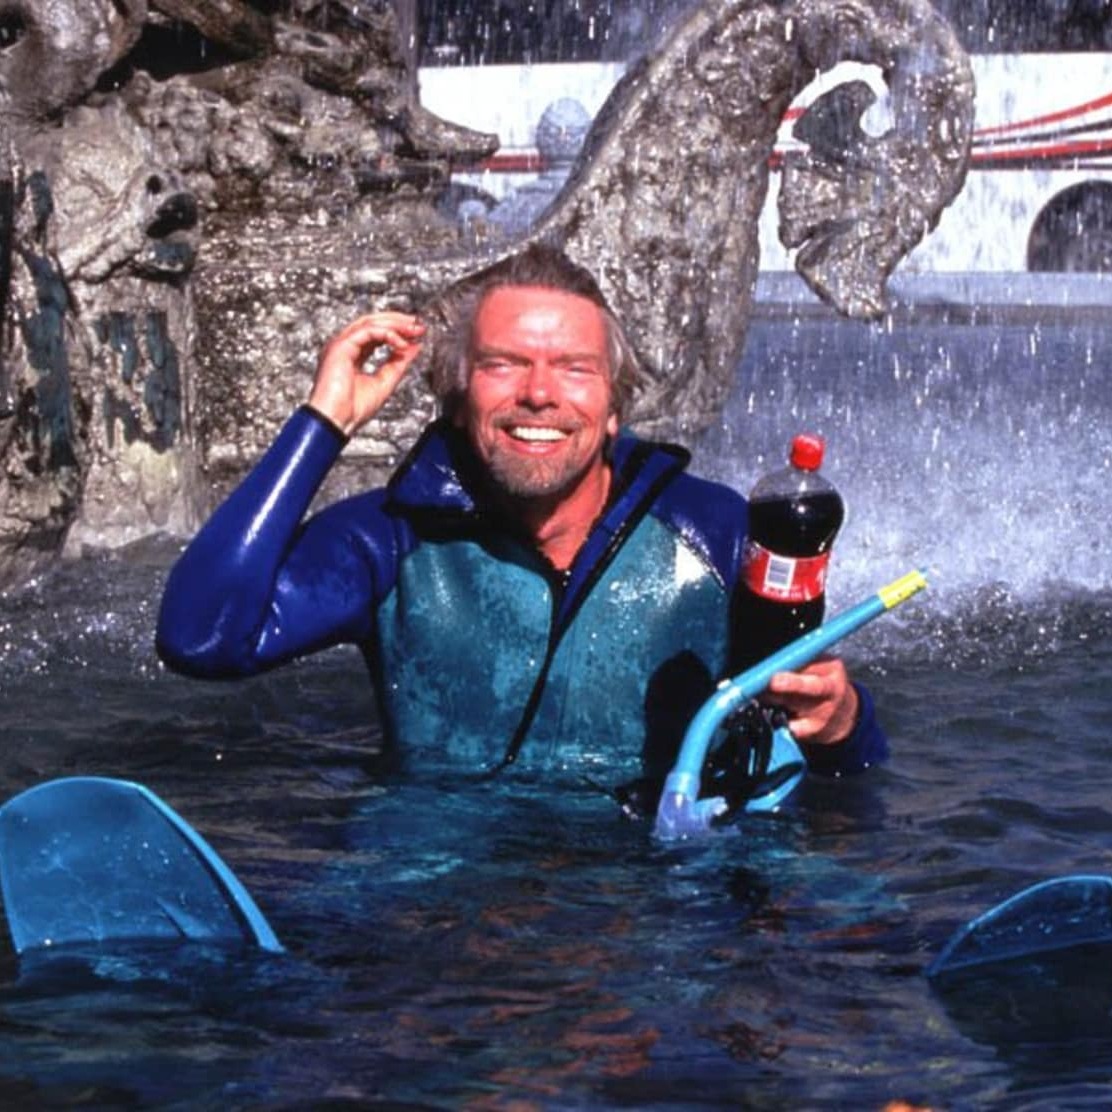 Richard Branson in a wet suit sitting in a fountain with a Virgin Cola bottle